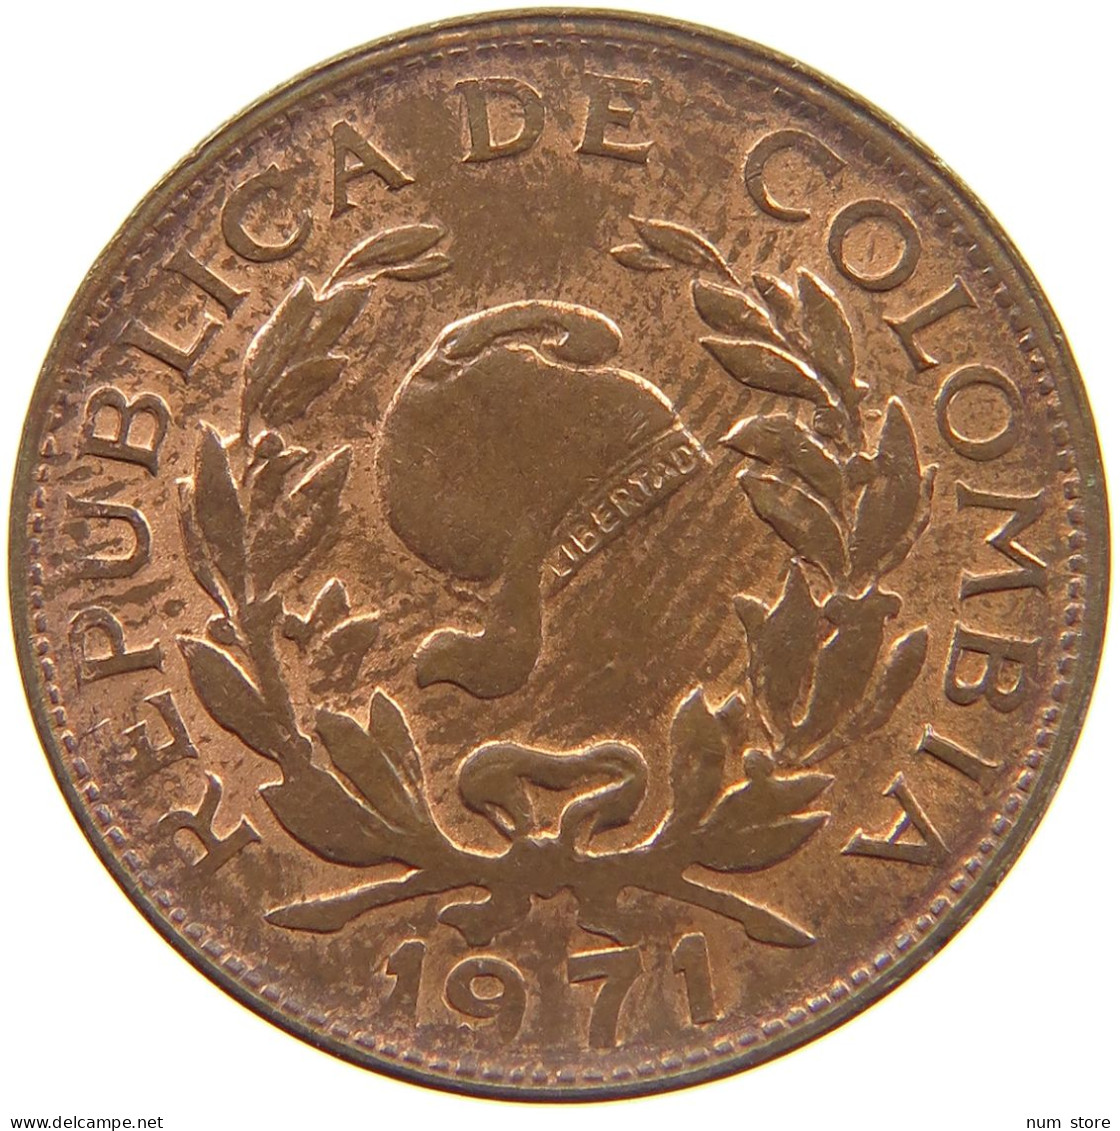 COLOMBIA 5 CENTAVOS 1971  #MA 025448 - Colombie